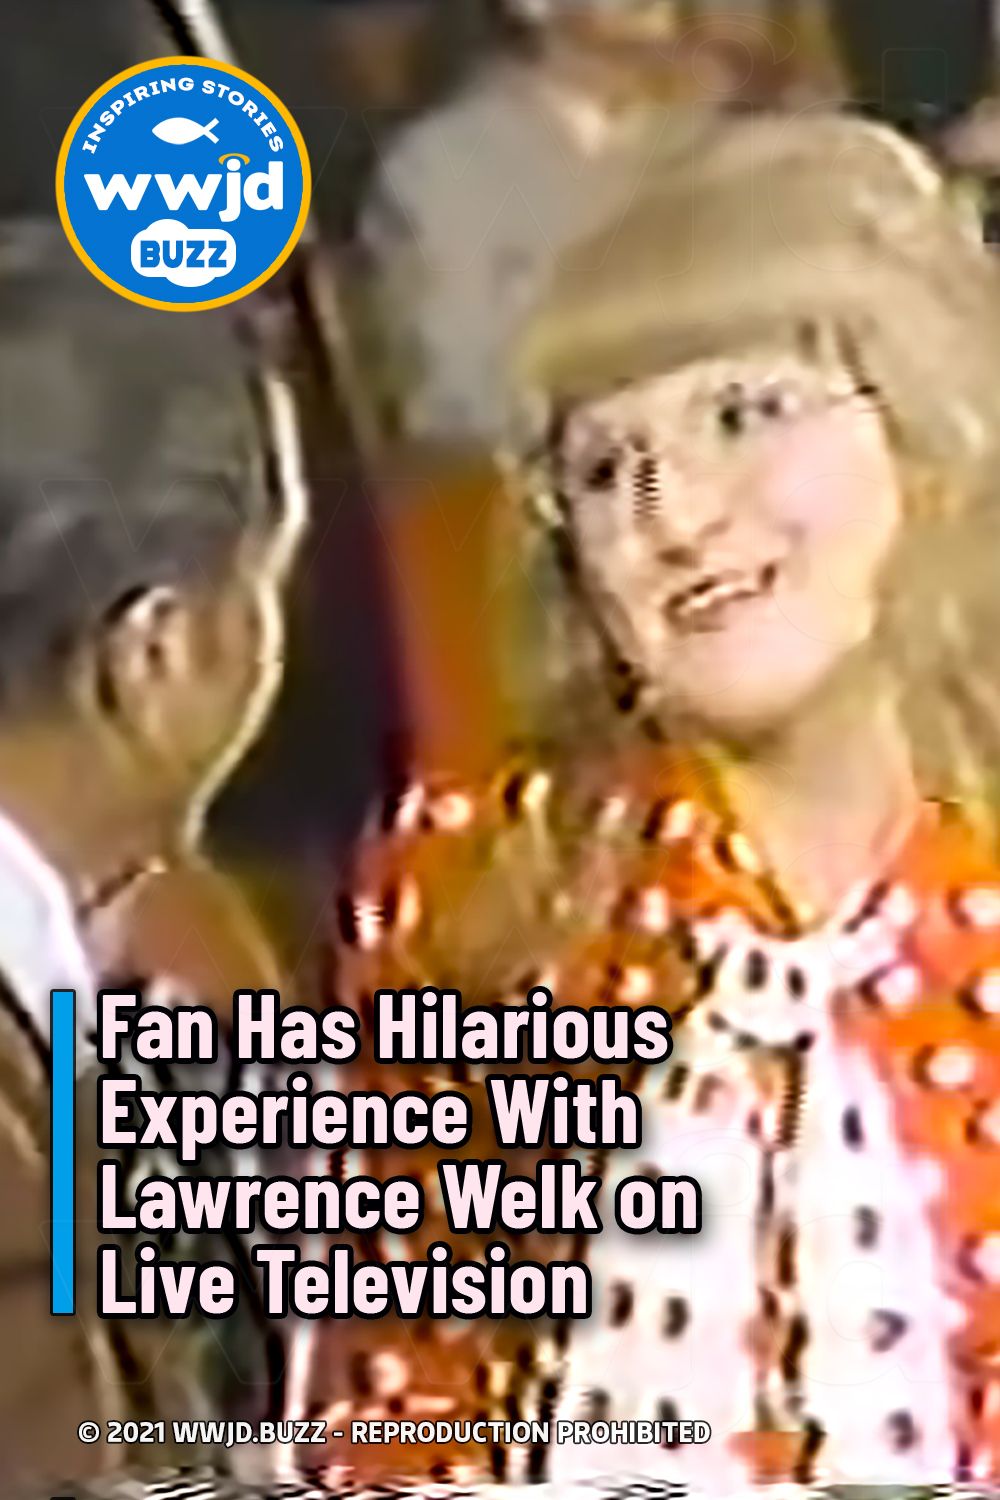 Fan Has Hilarious Experience With Lawrence Welk on Live Television